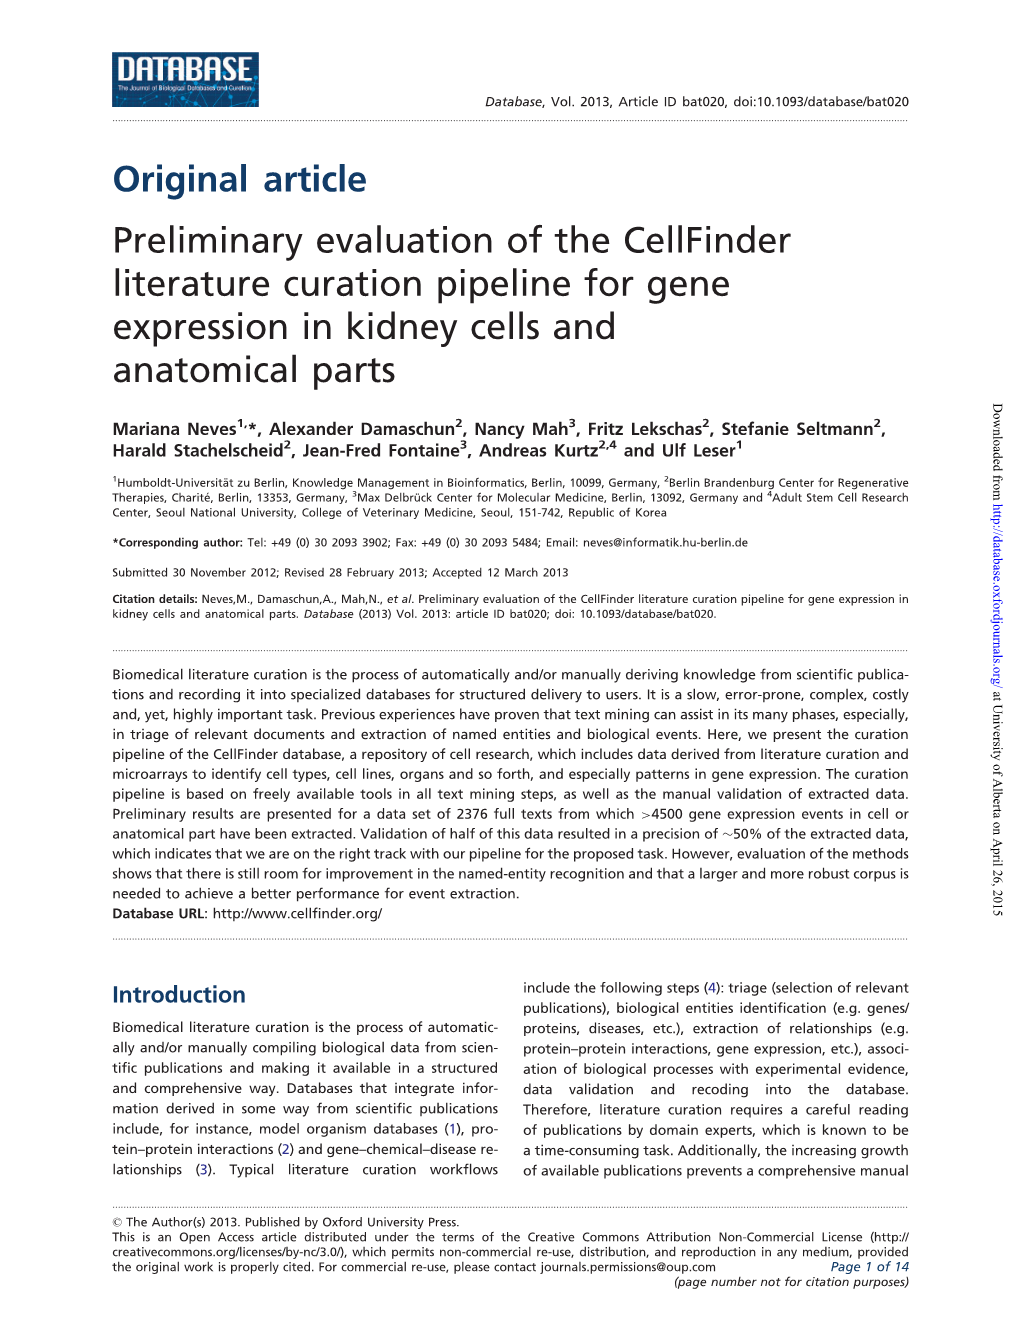 Original Article Preliminary Evaluation of the Cellfinder Literature Curation Pipeline for Gene Expression in Kidney Cells and Anatomical Parts Downloaded From